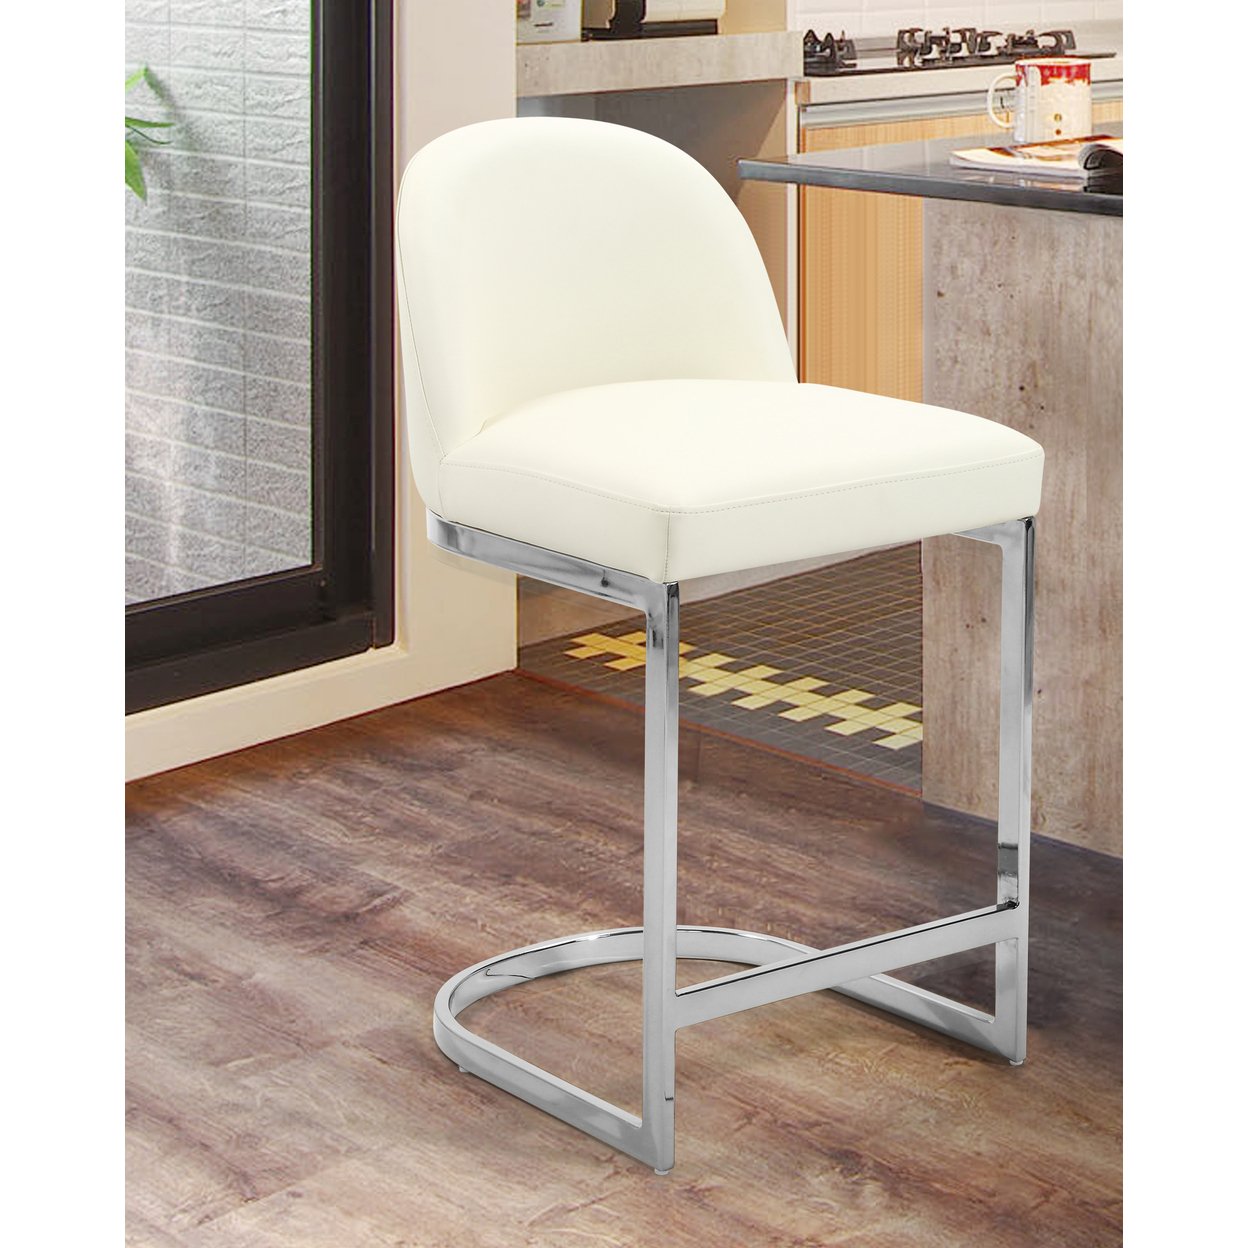 Iconic Home Liana Counter Stool Chair PU Leather Upholstered Armless Design Half-Moon Chrome Plated Solid Metal U-Shaped Base - Cream